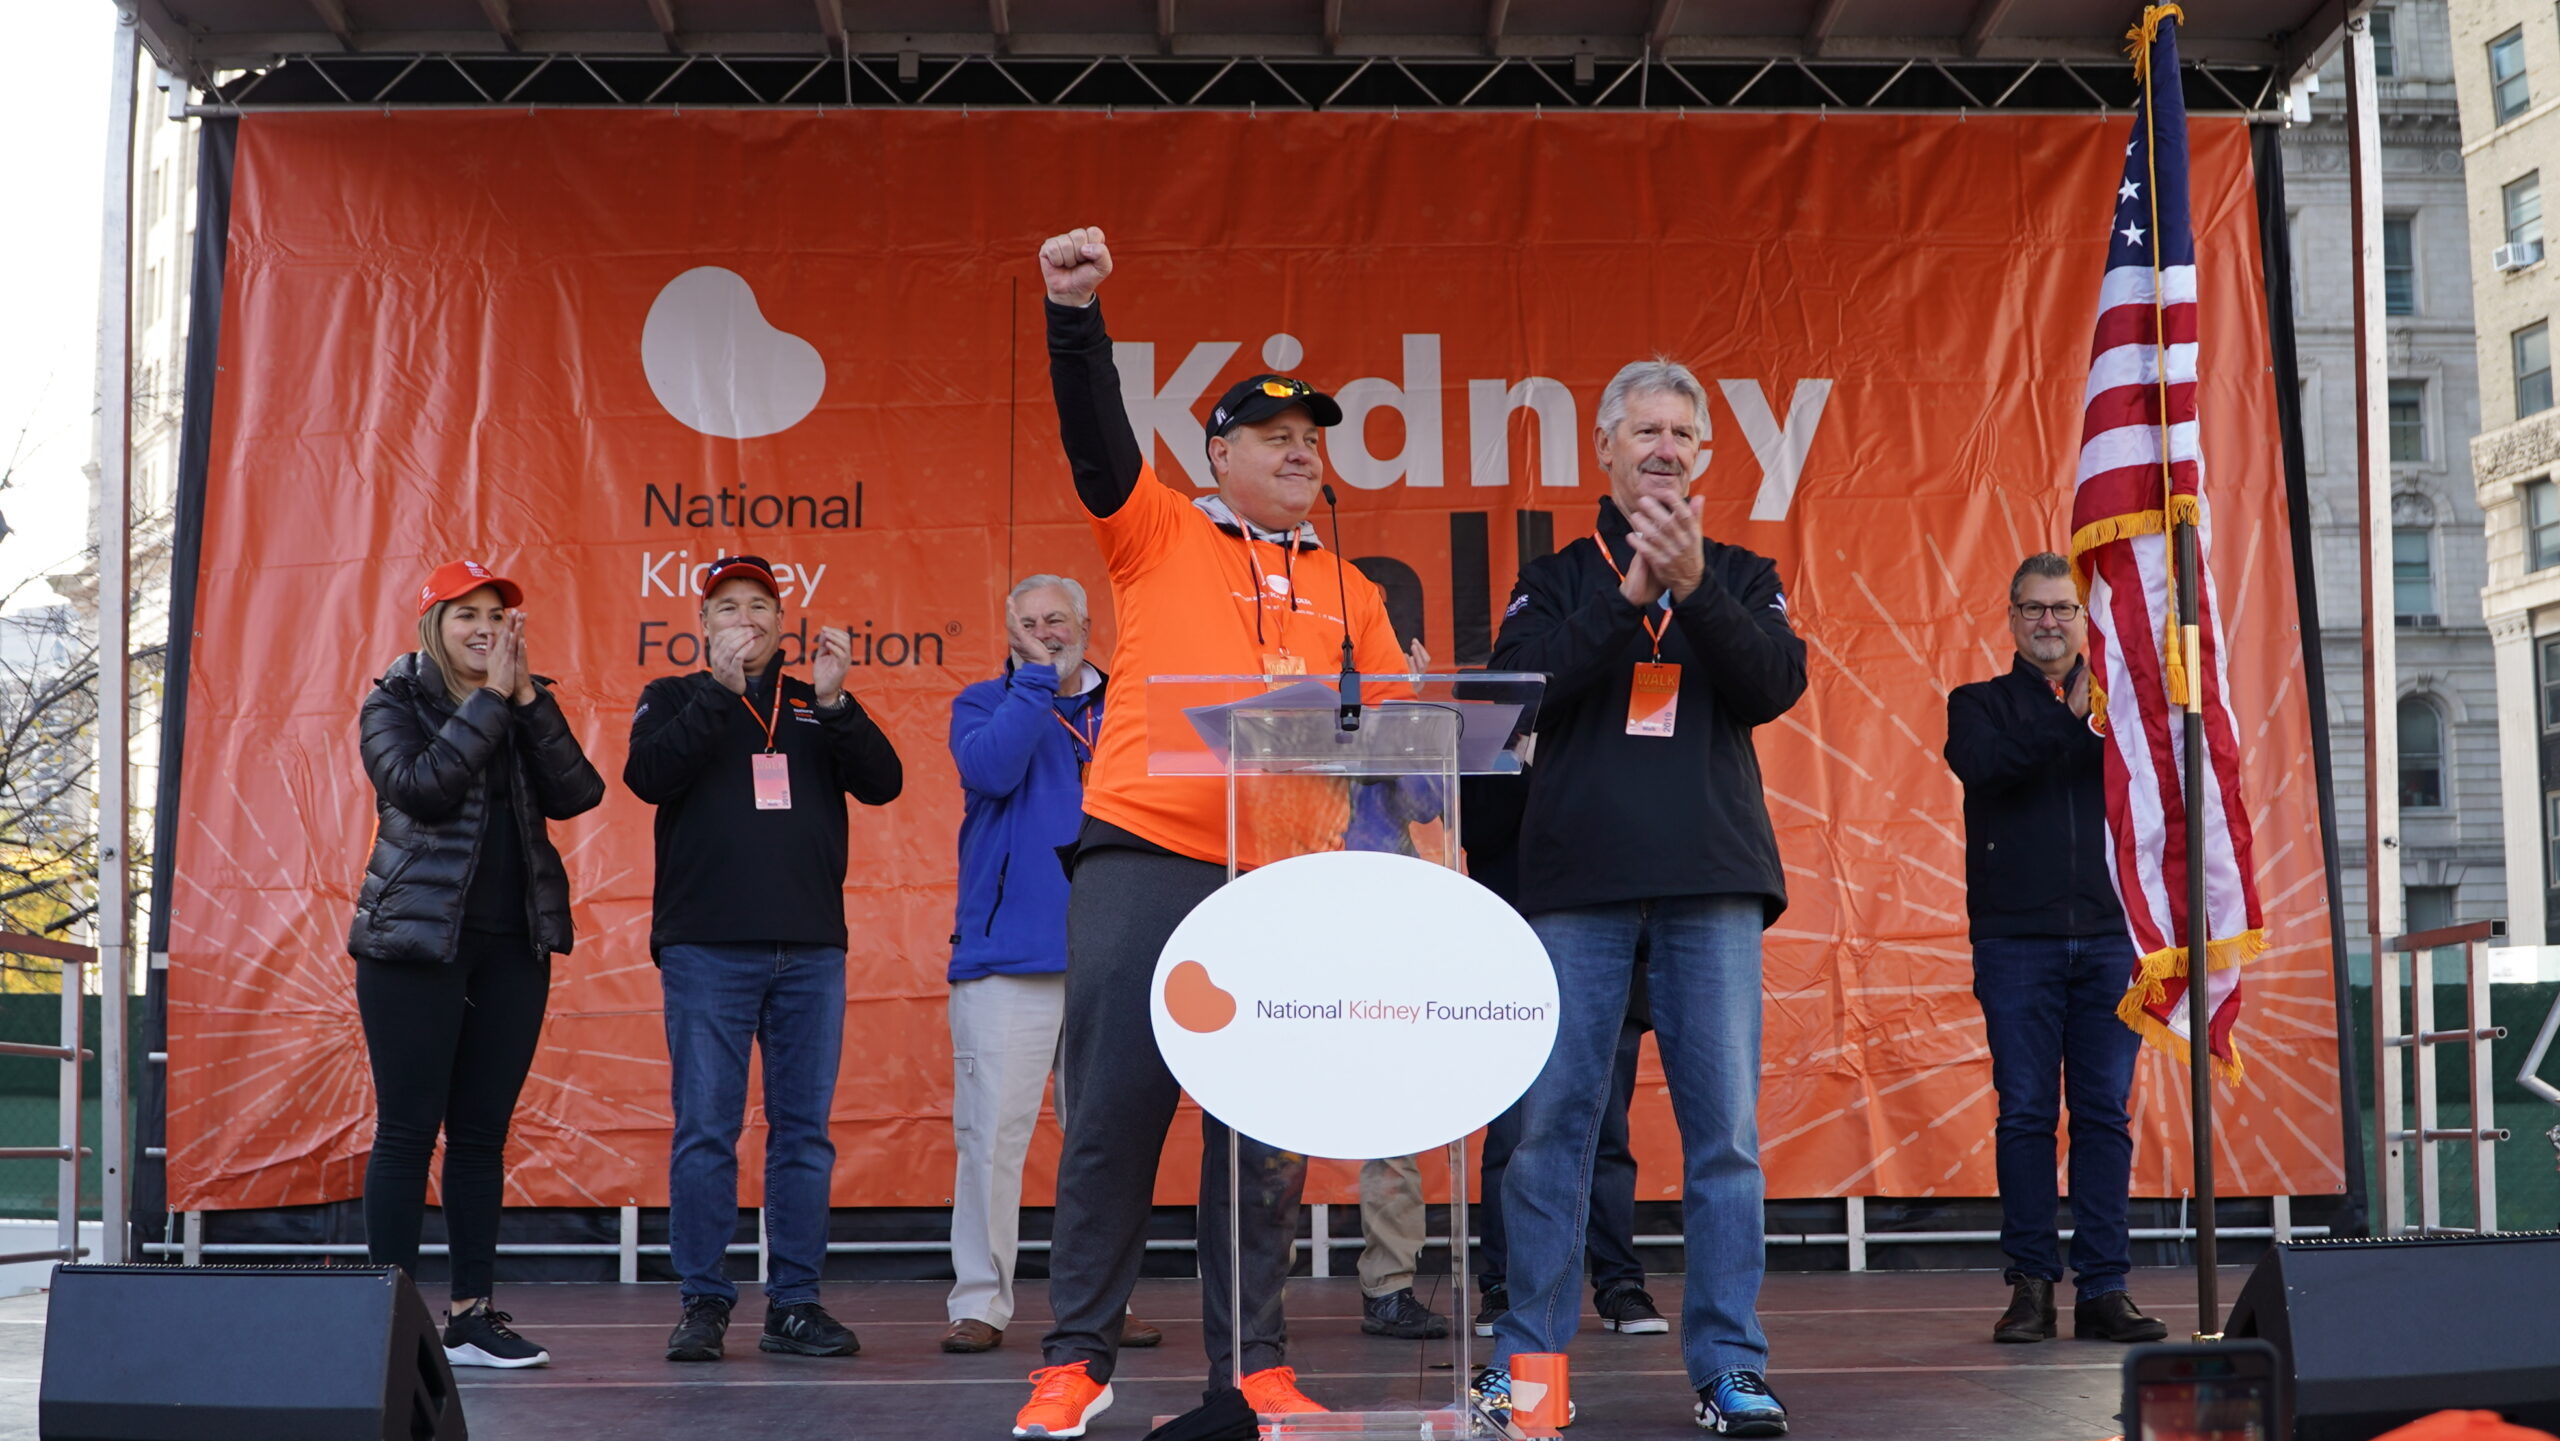 Atlantic Tomorrow’s Office and Konica Minolta Walk the Talk for the National Kidney Foundation